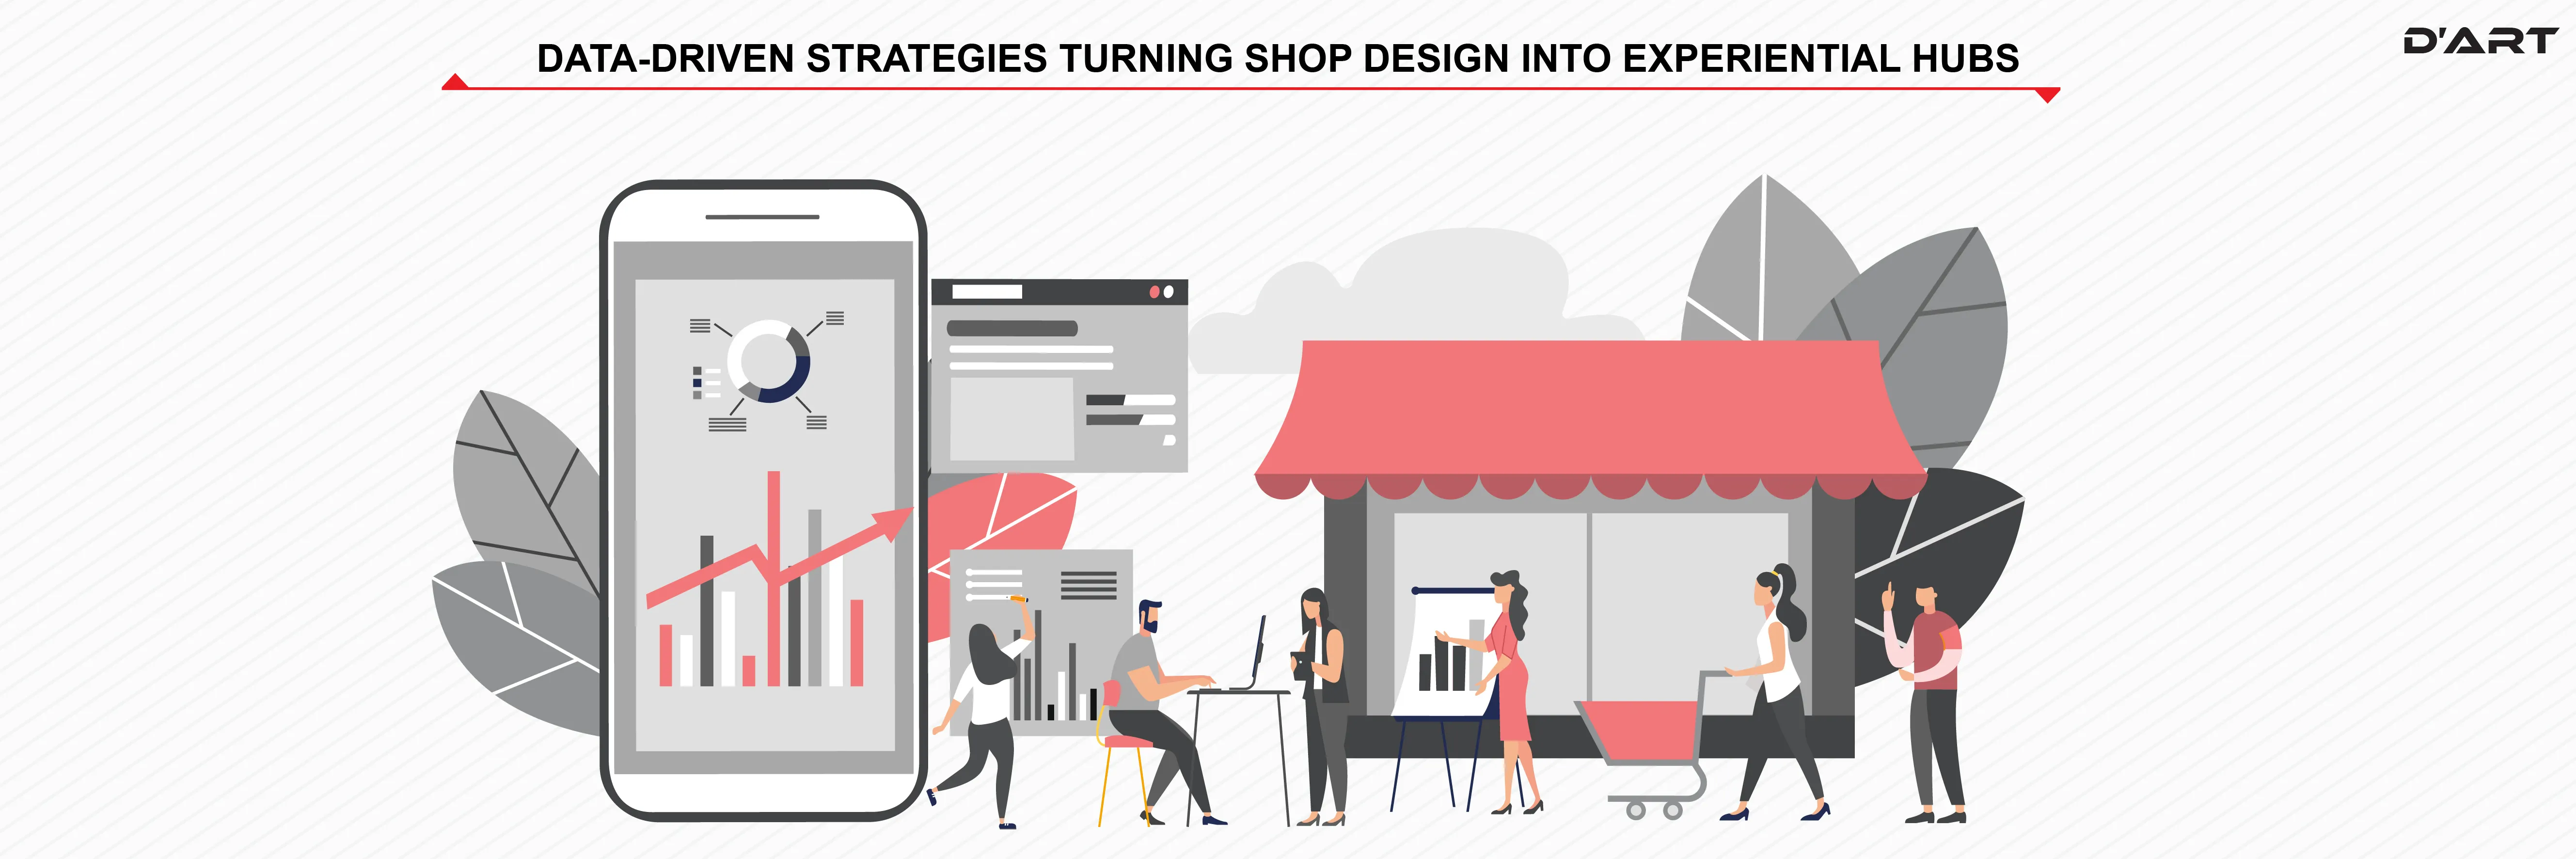 Data-driven strategies turning shop design into experiential hubs